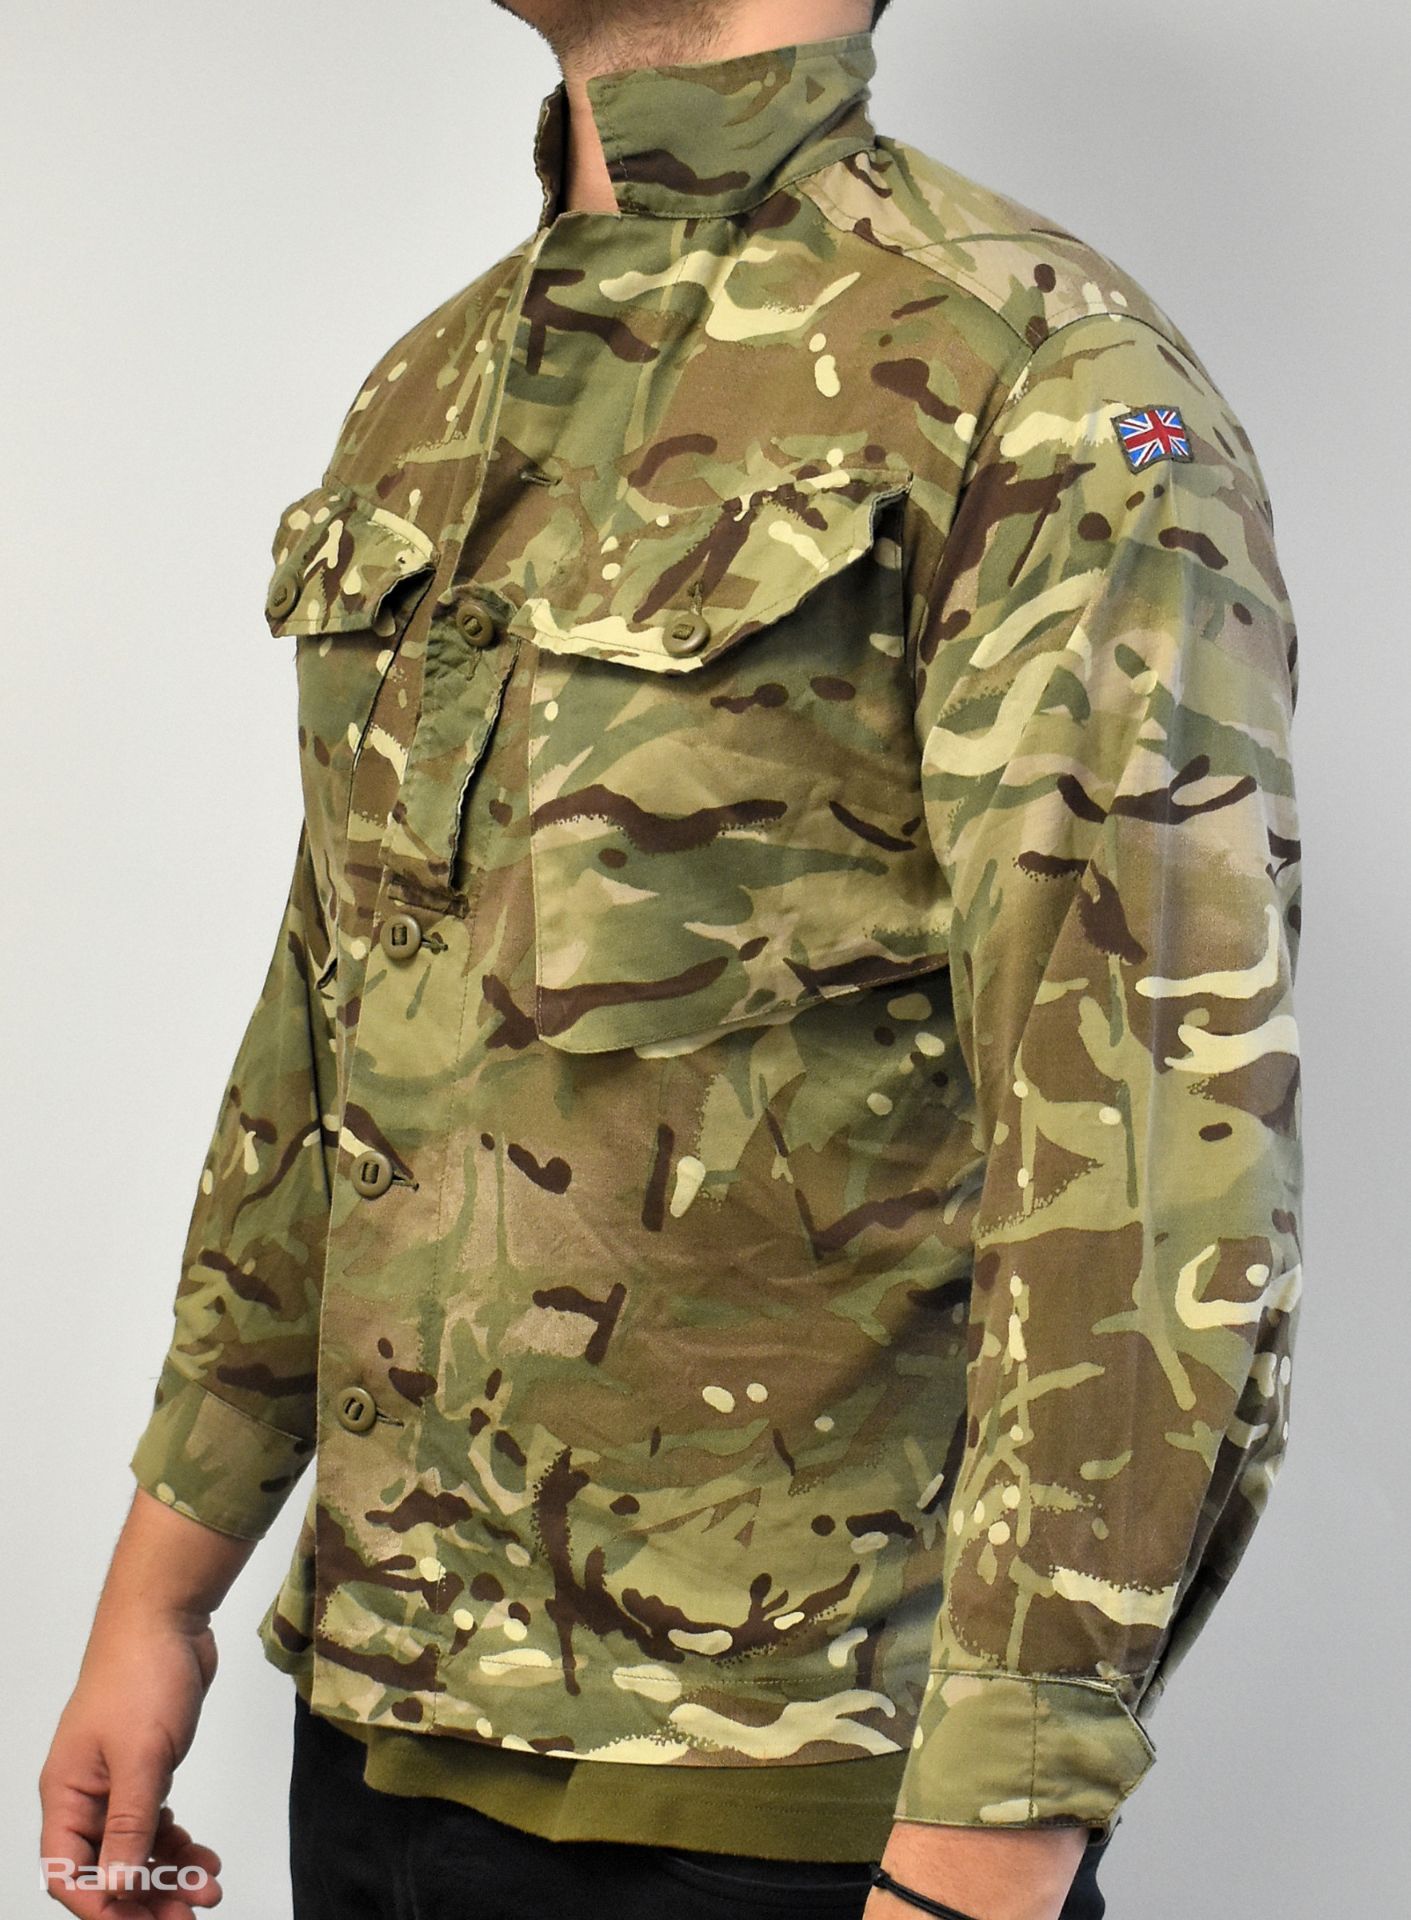 150x British Army MTP shirts barrack - mixed grades and sizes - Image 2 of 14